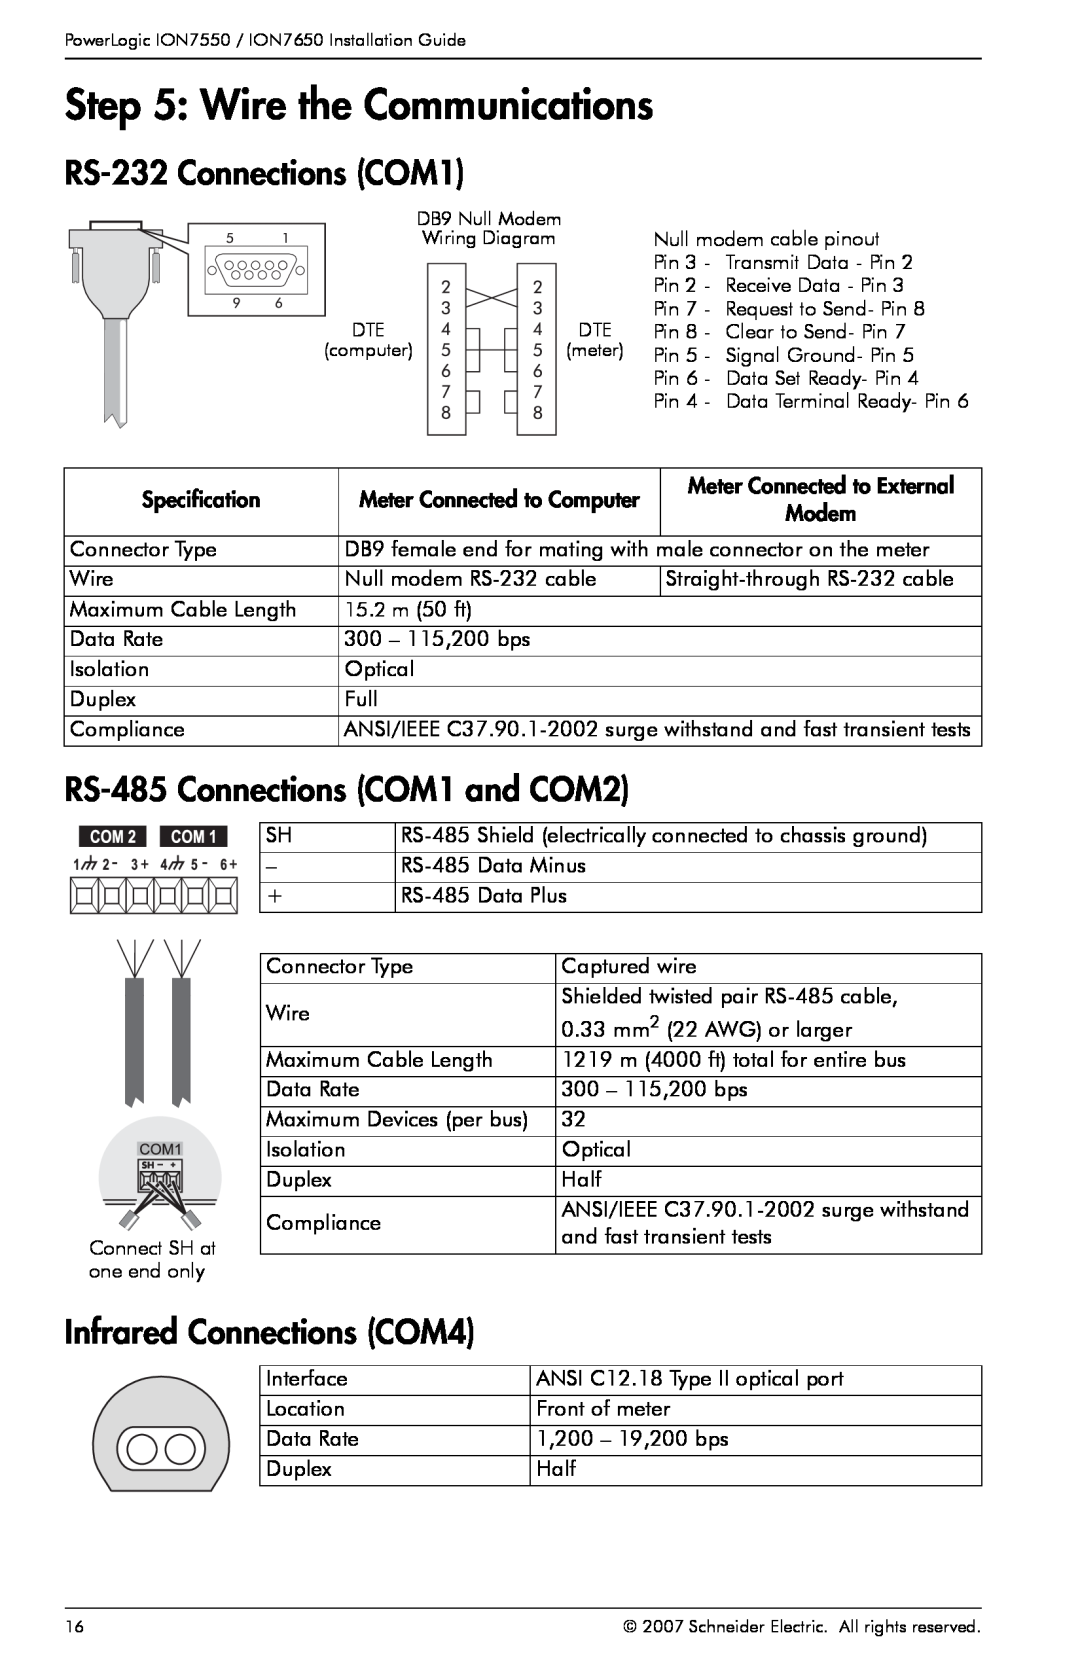 Schneider Electric ION7650, ION7550 Wire the Communications, RS-232 Connections COM1, RS-485 Connections COM1 and COM2 